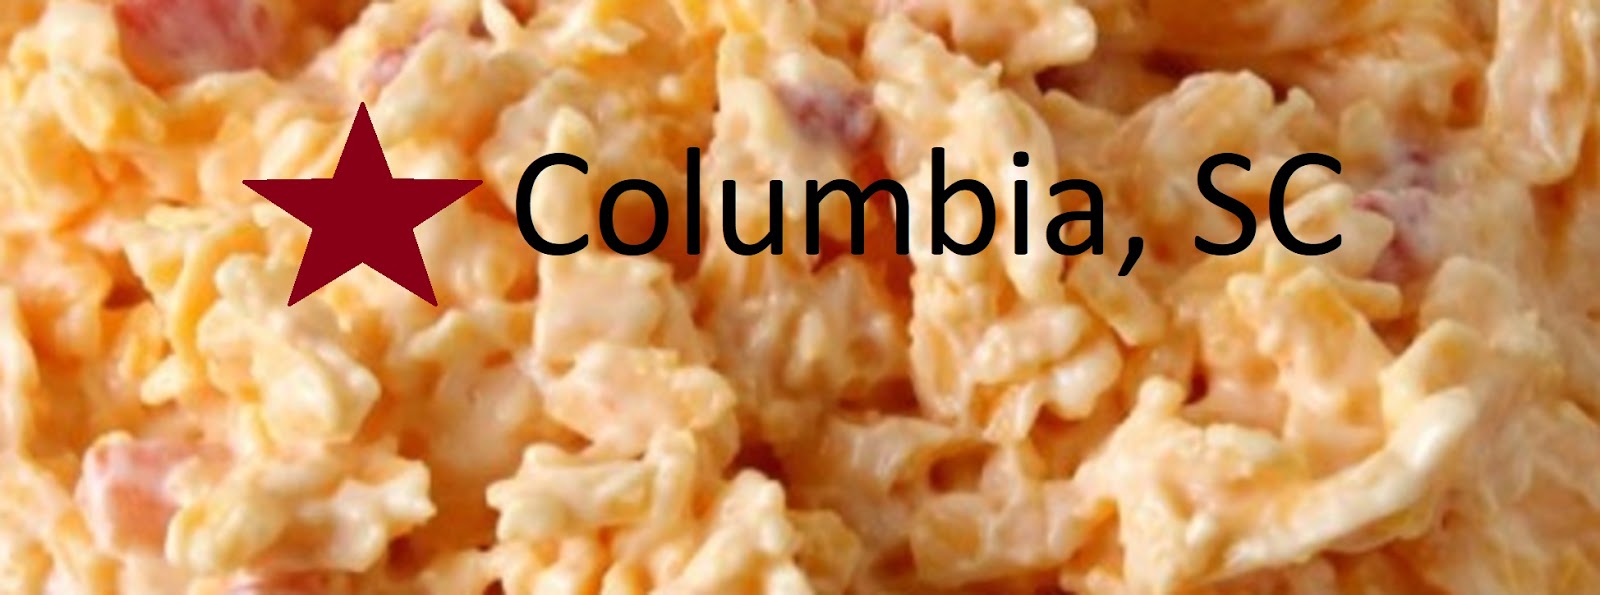 Esoteric Columbia Columbia Is Home to the First Pimento Cheese Recipe